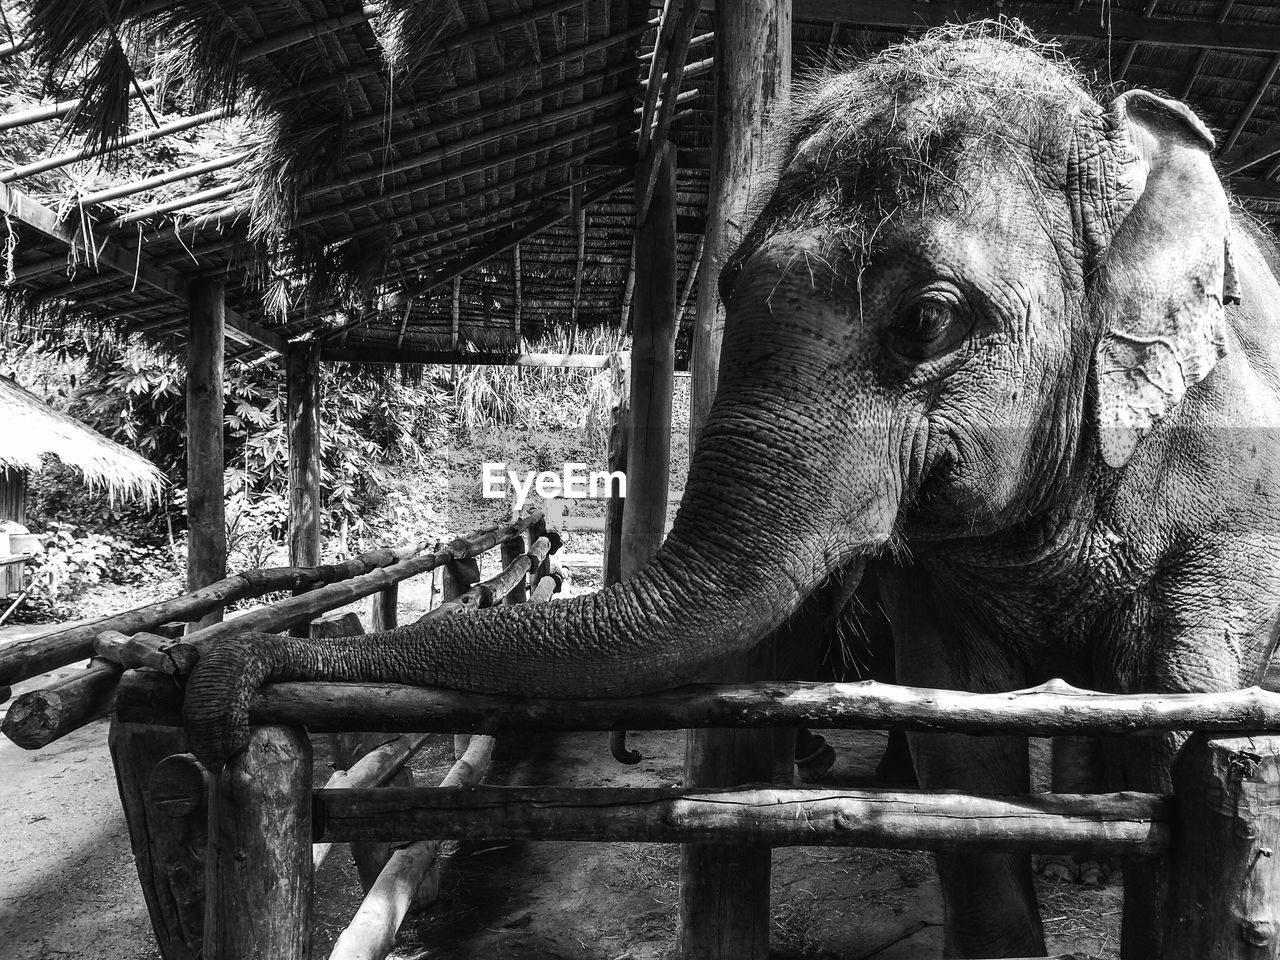 Elephant in shed